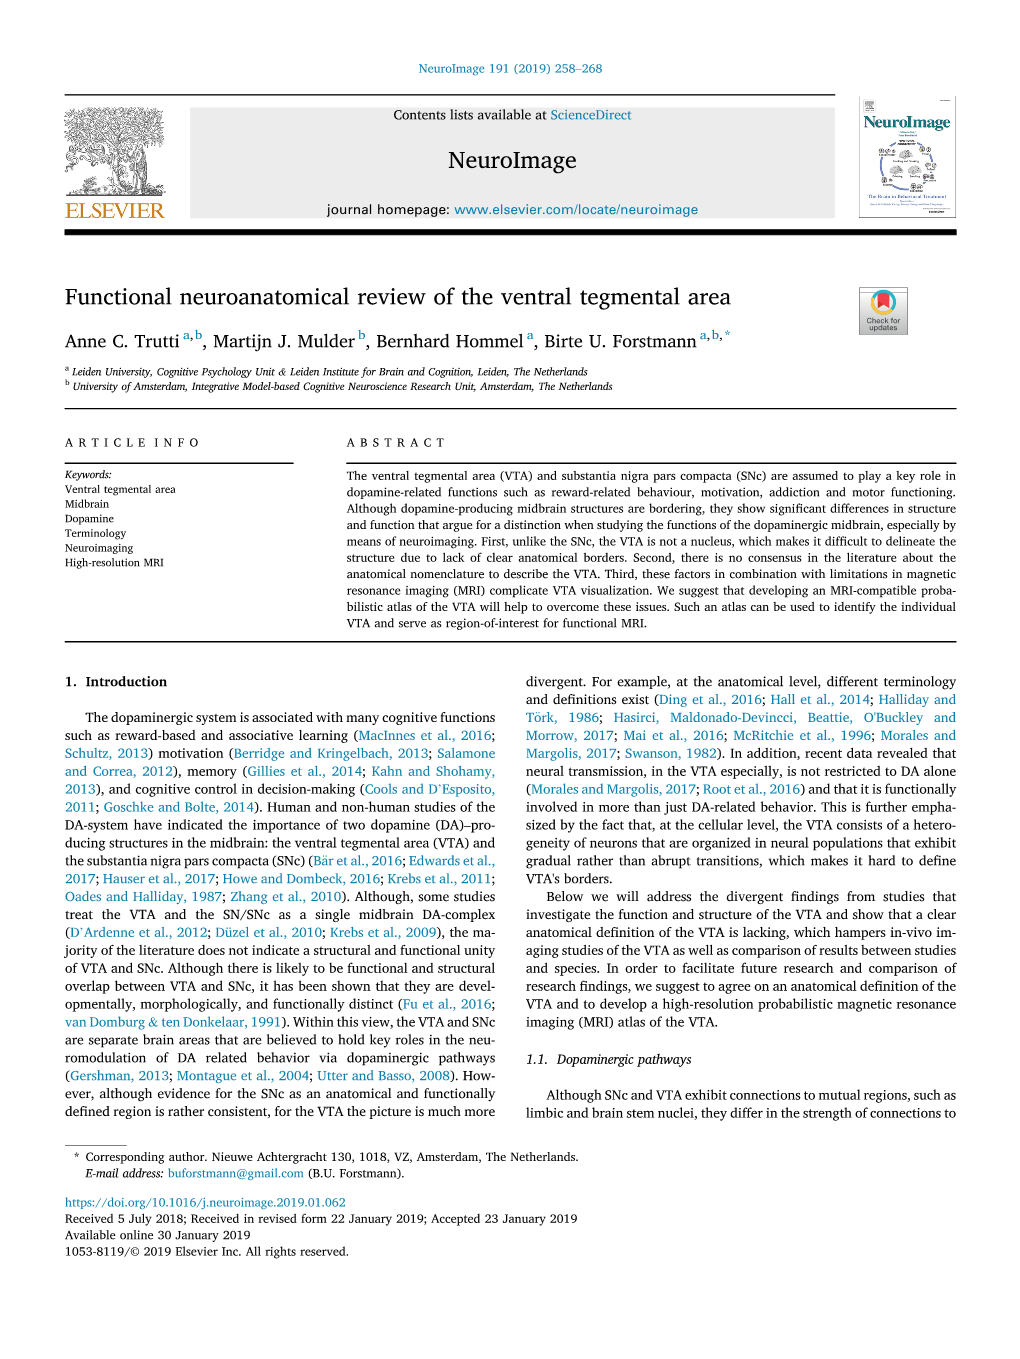 Functional Neuroanatomical Review of the Ventral Tegmental Area